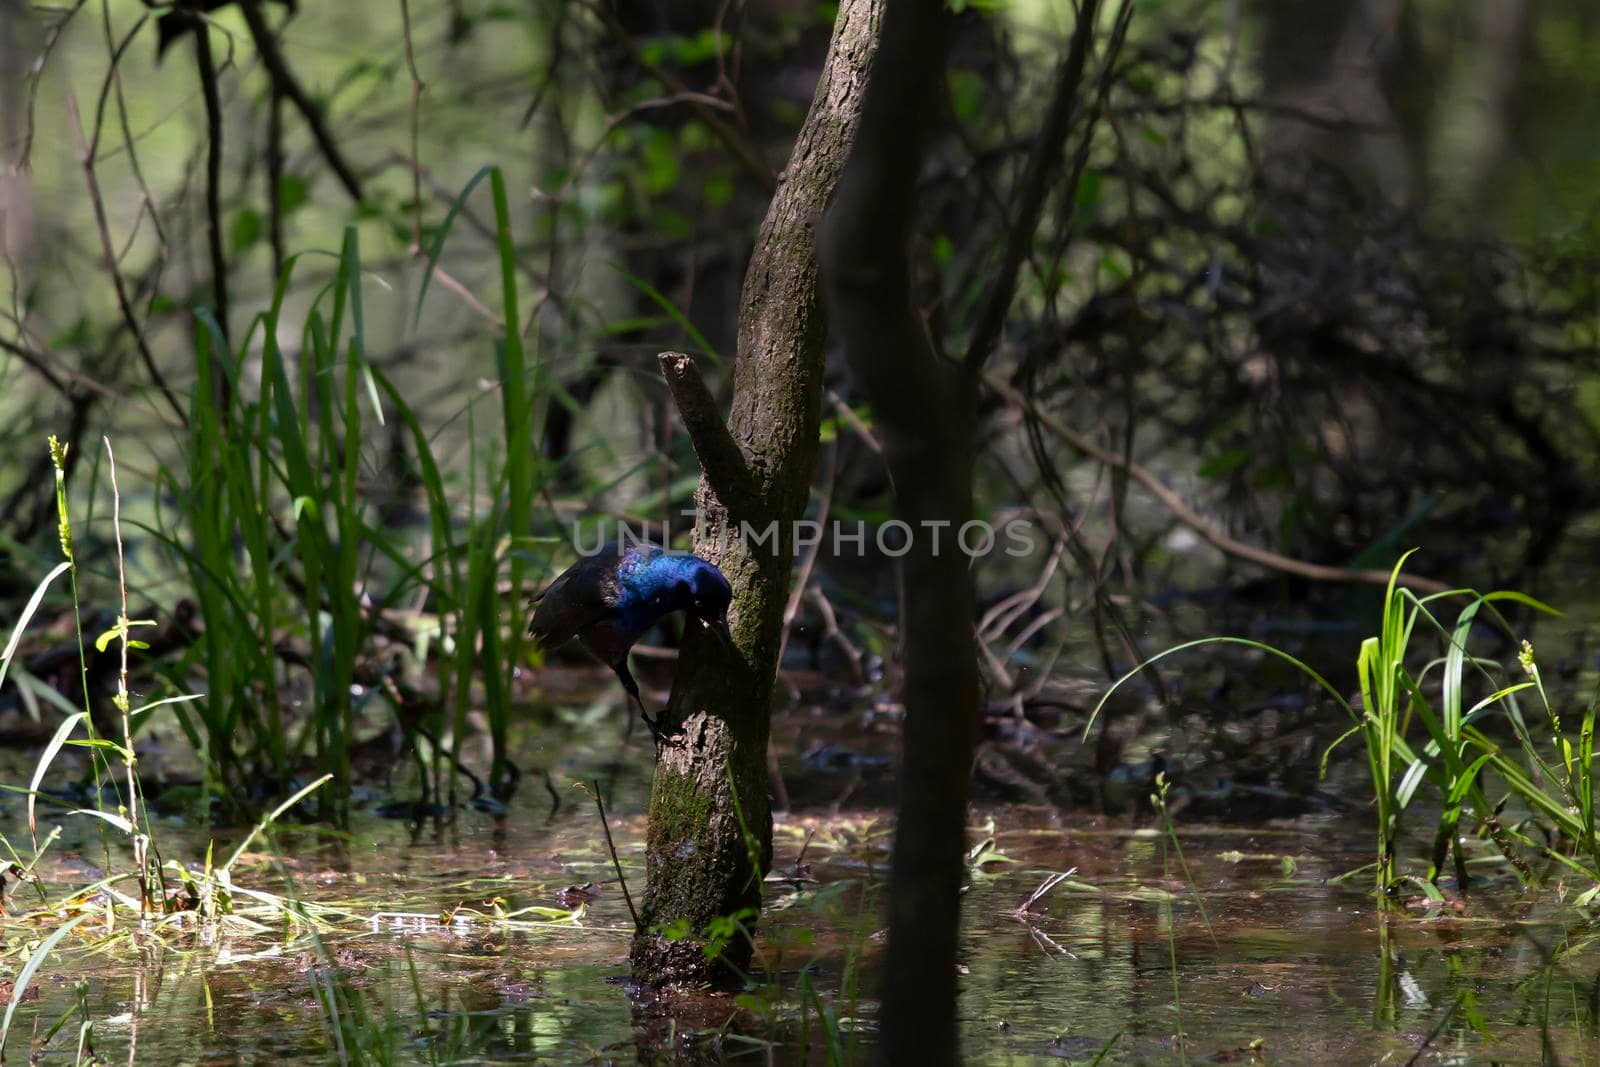 Common grackle feeding on insects in a swamp tree